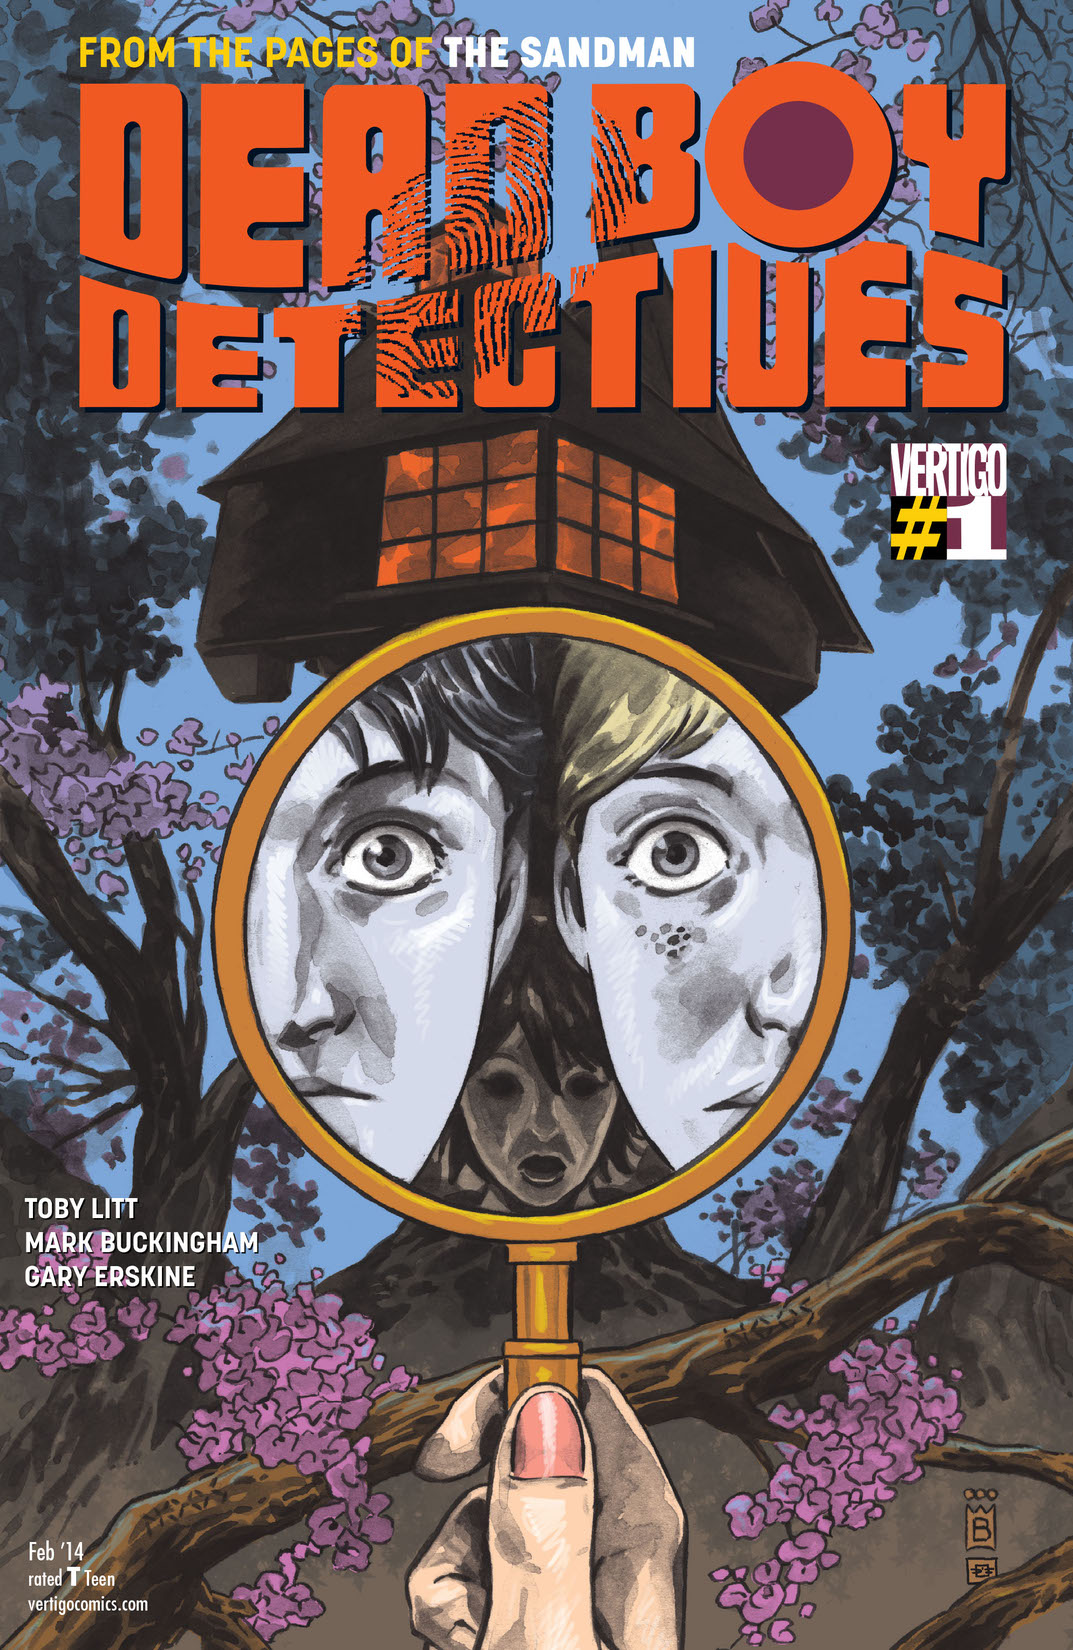 The Dead Boy Detectives #1 preview images